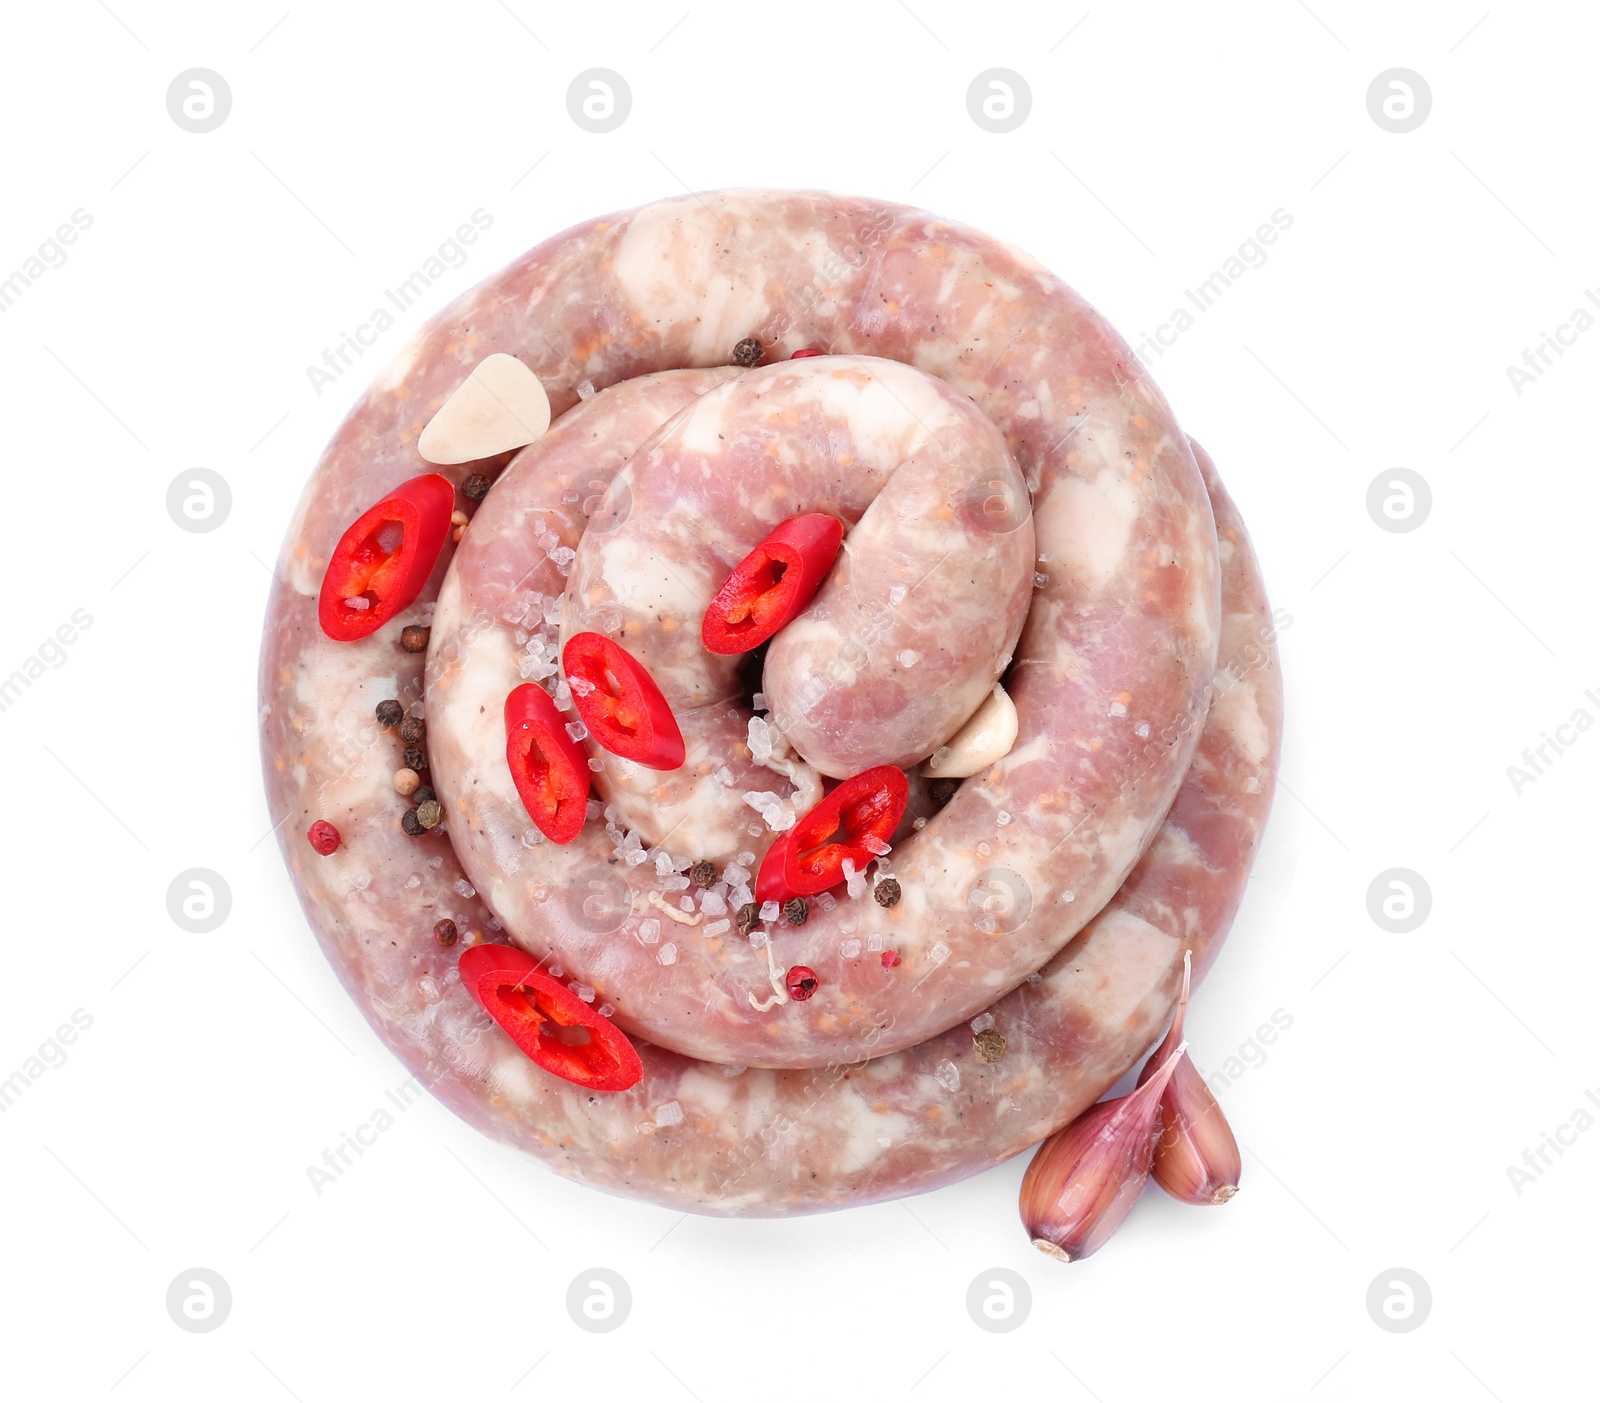 Photo of Homemade sausage, garlic, chili and spices isolated on white, top view